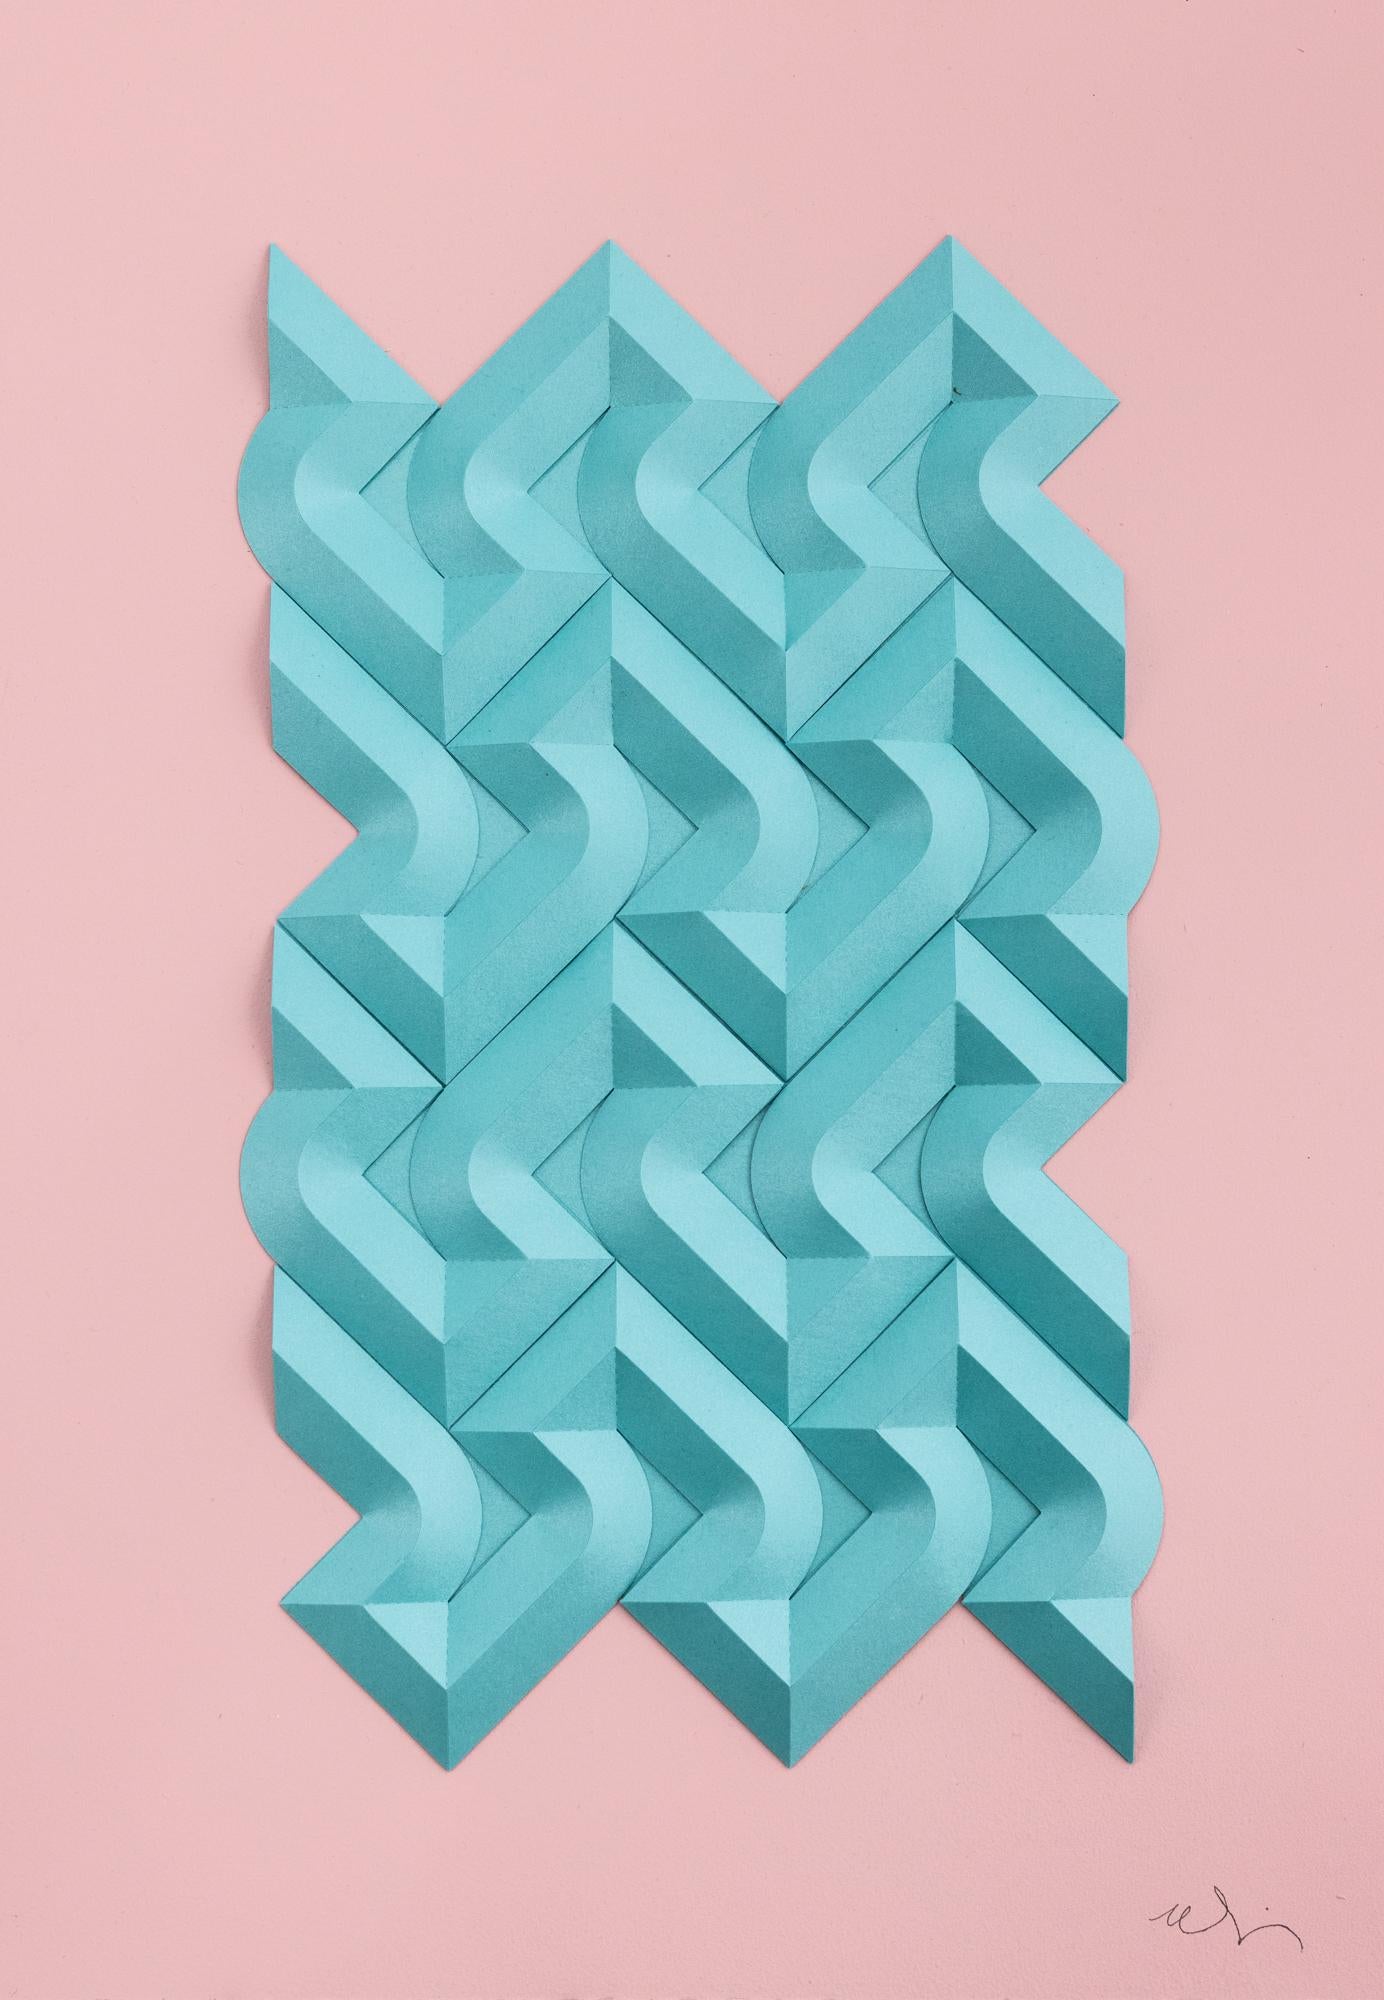 "S&S&S&S 4 in Iridescent Aquamarine on Pink", Folded Paper, Abstract Patterns